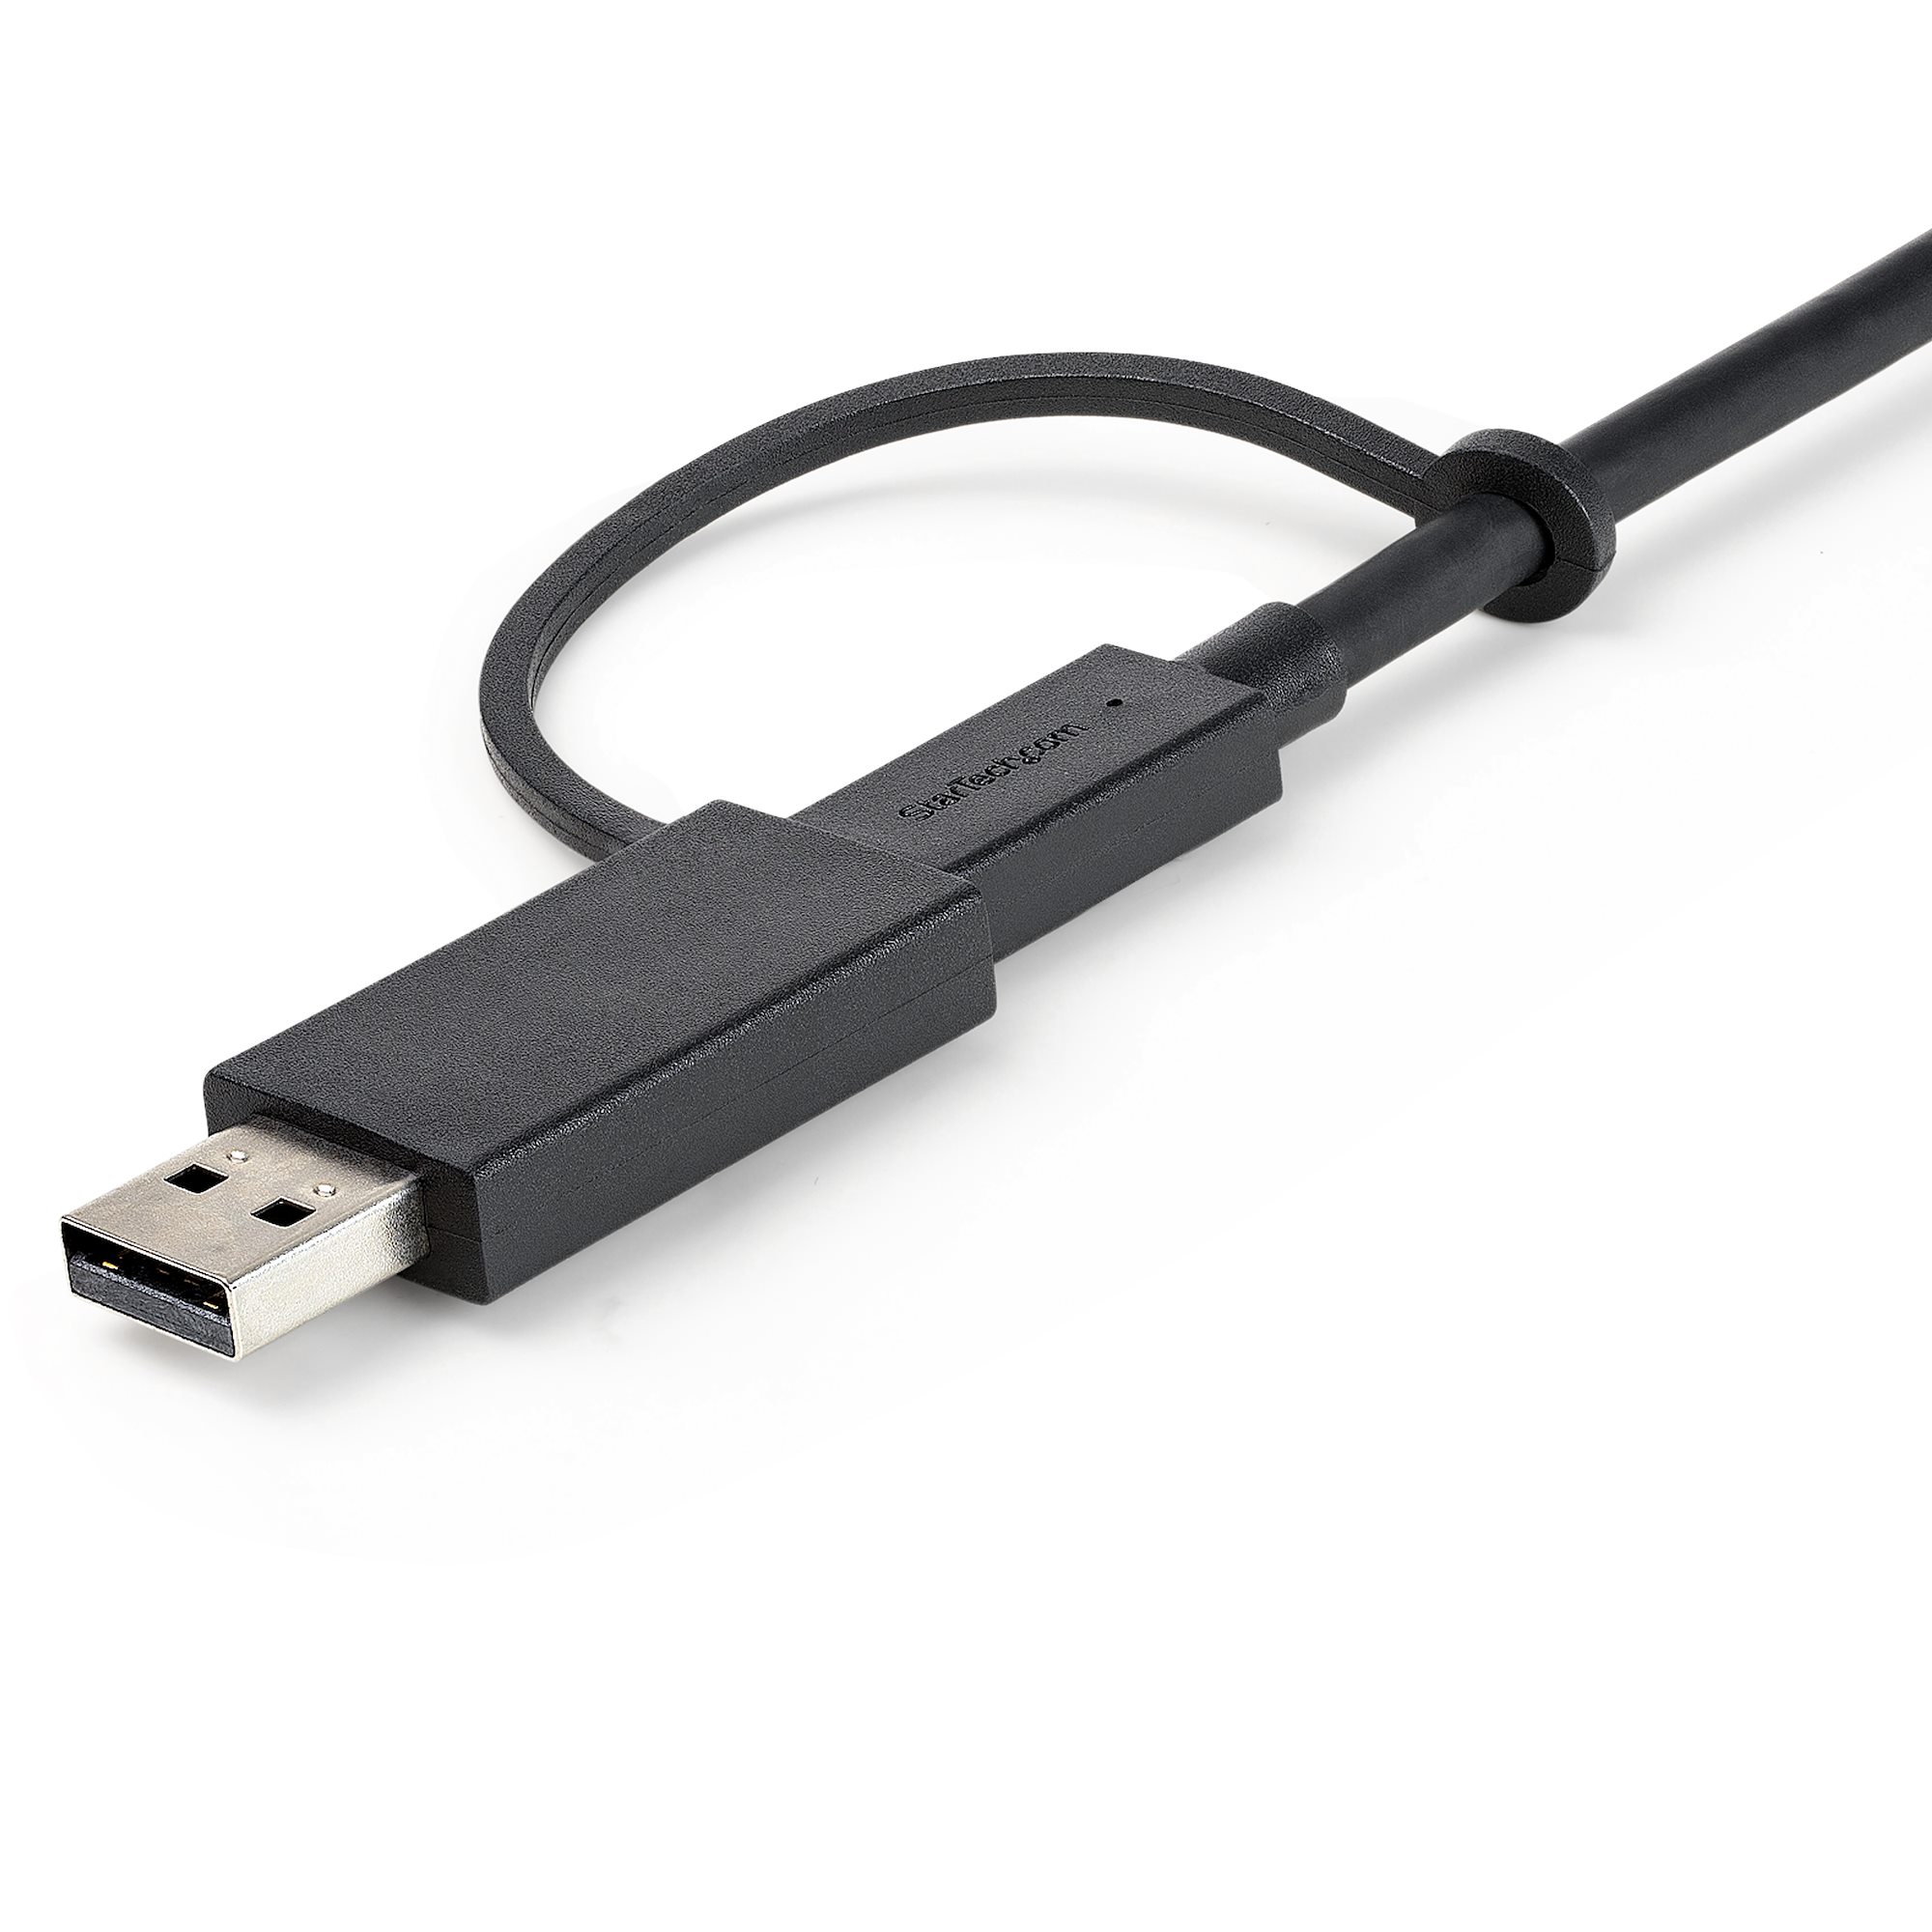 HP USB-A to USB-C Dongle